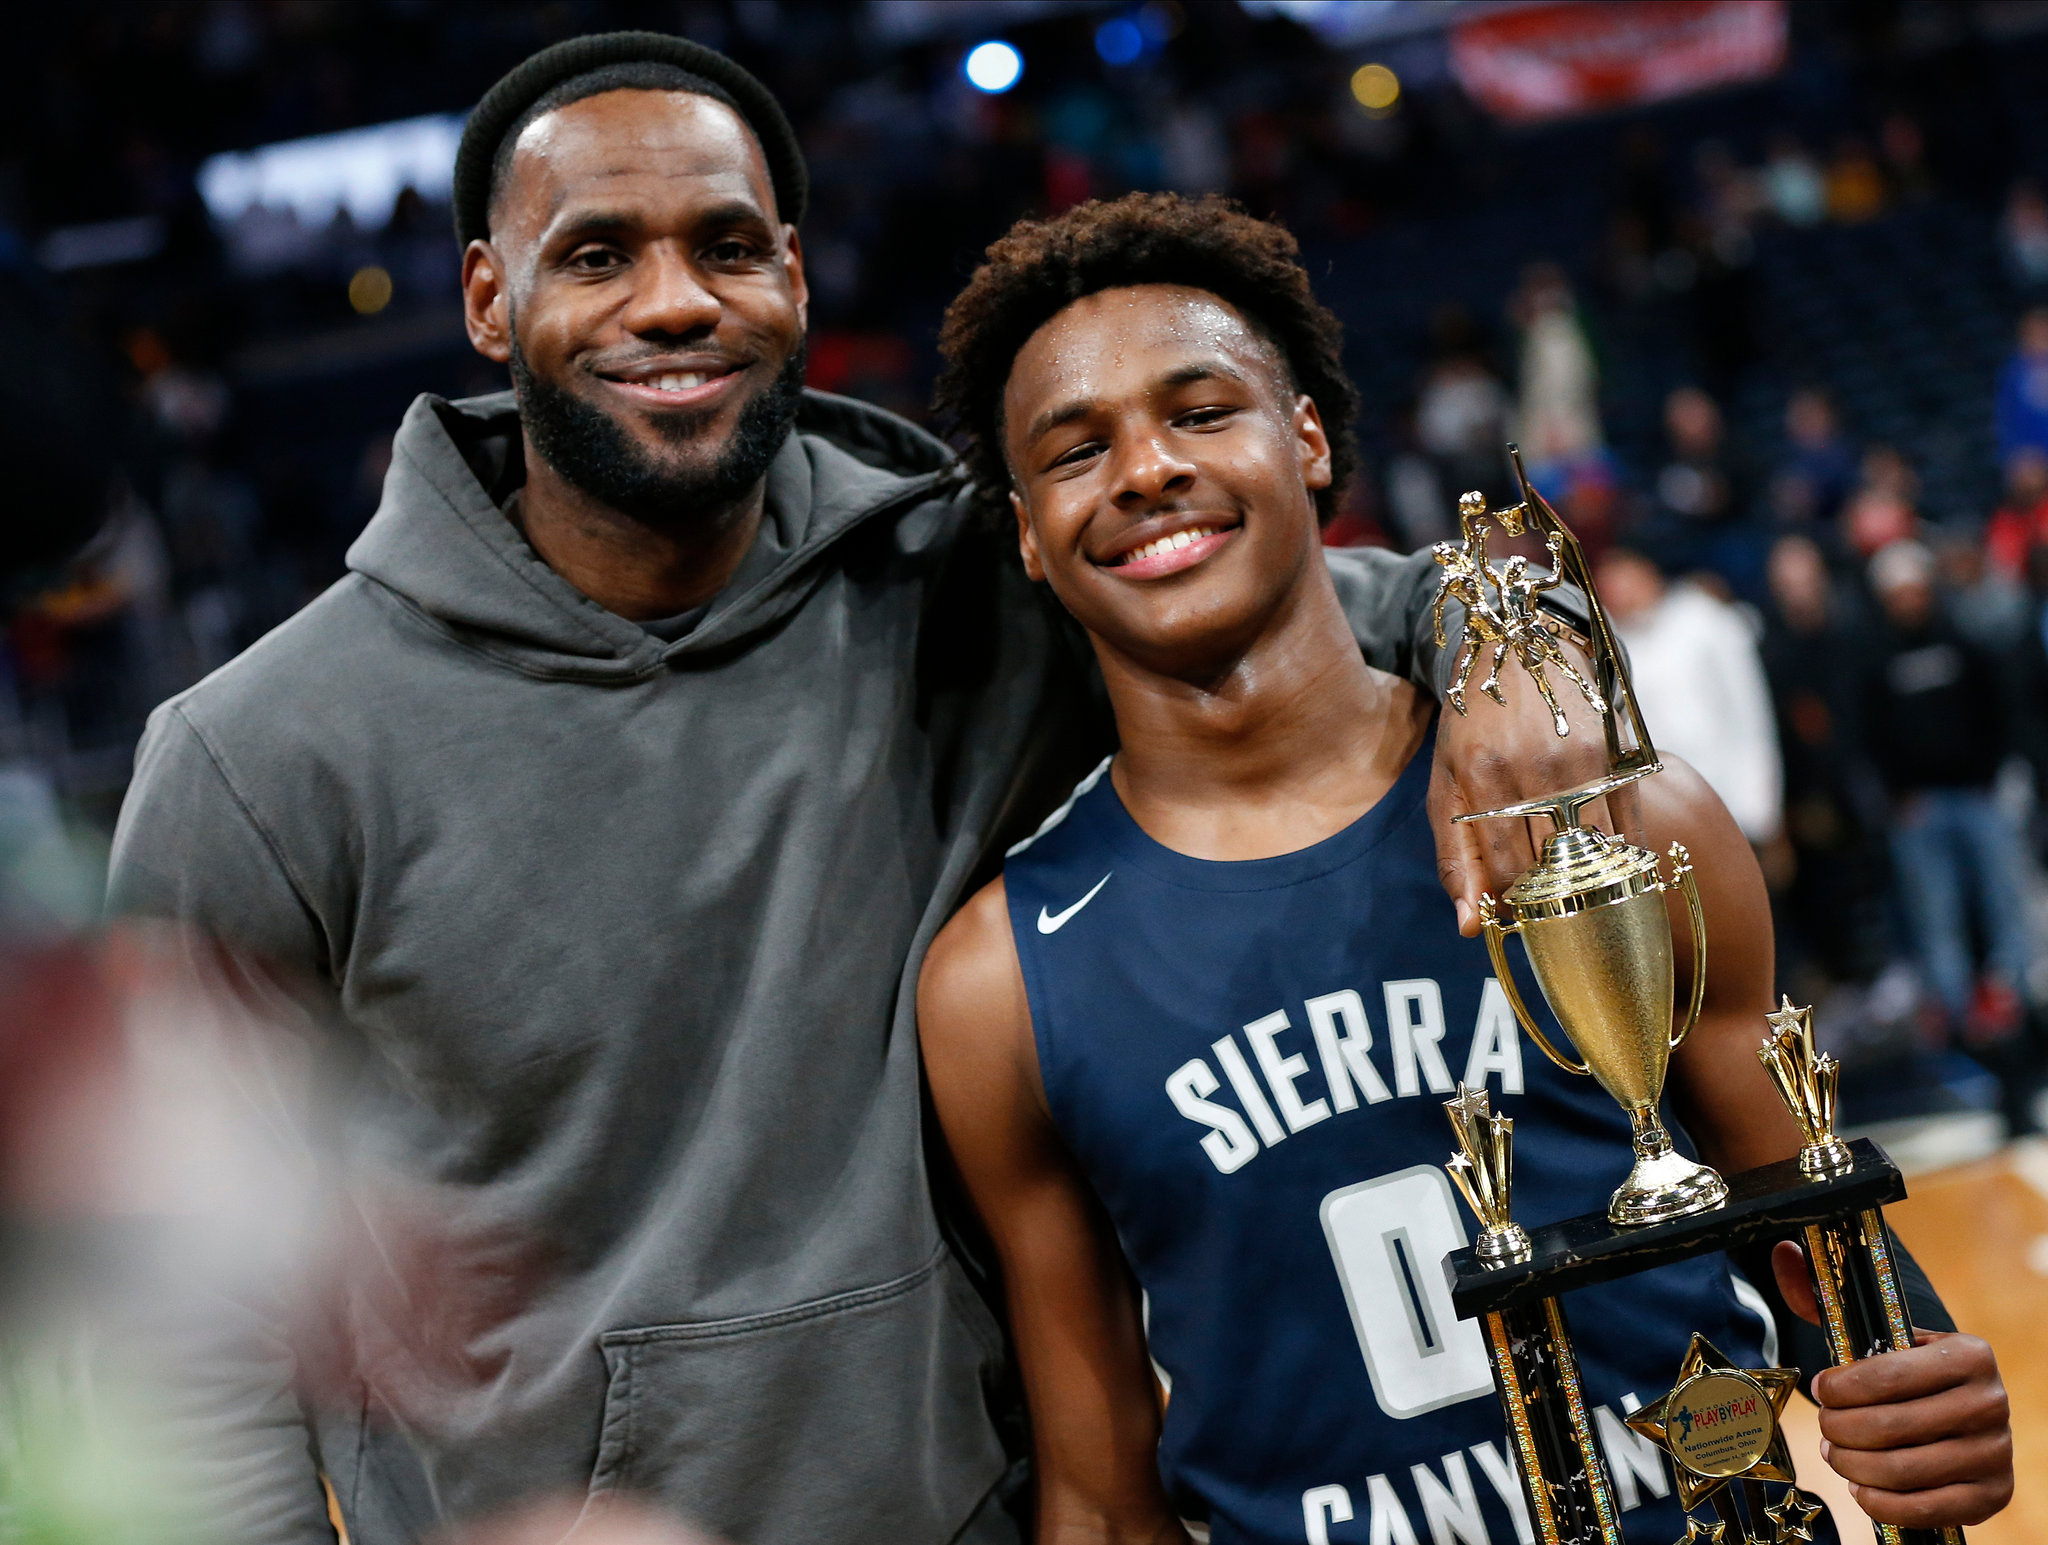 The rising young and talented basketball player, Bronny holding an troupe for Sierra Canyon School with his father, Lebron. 